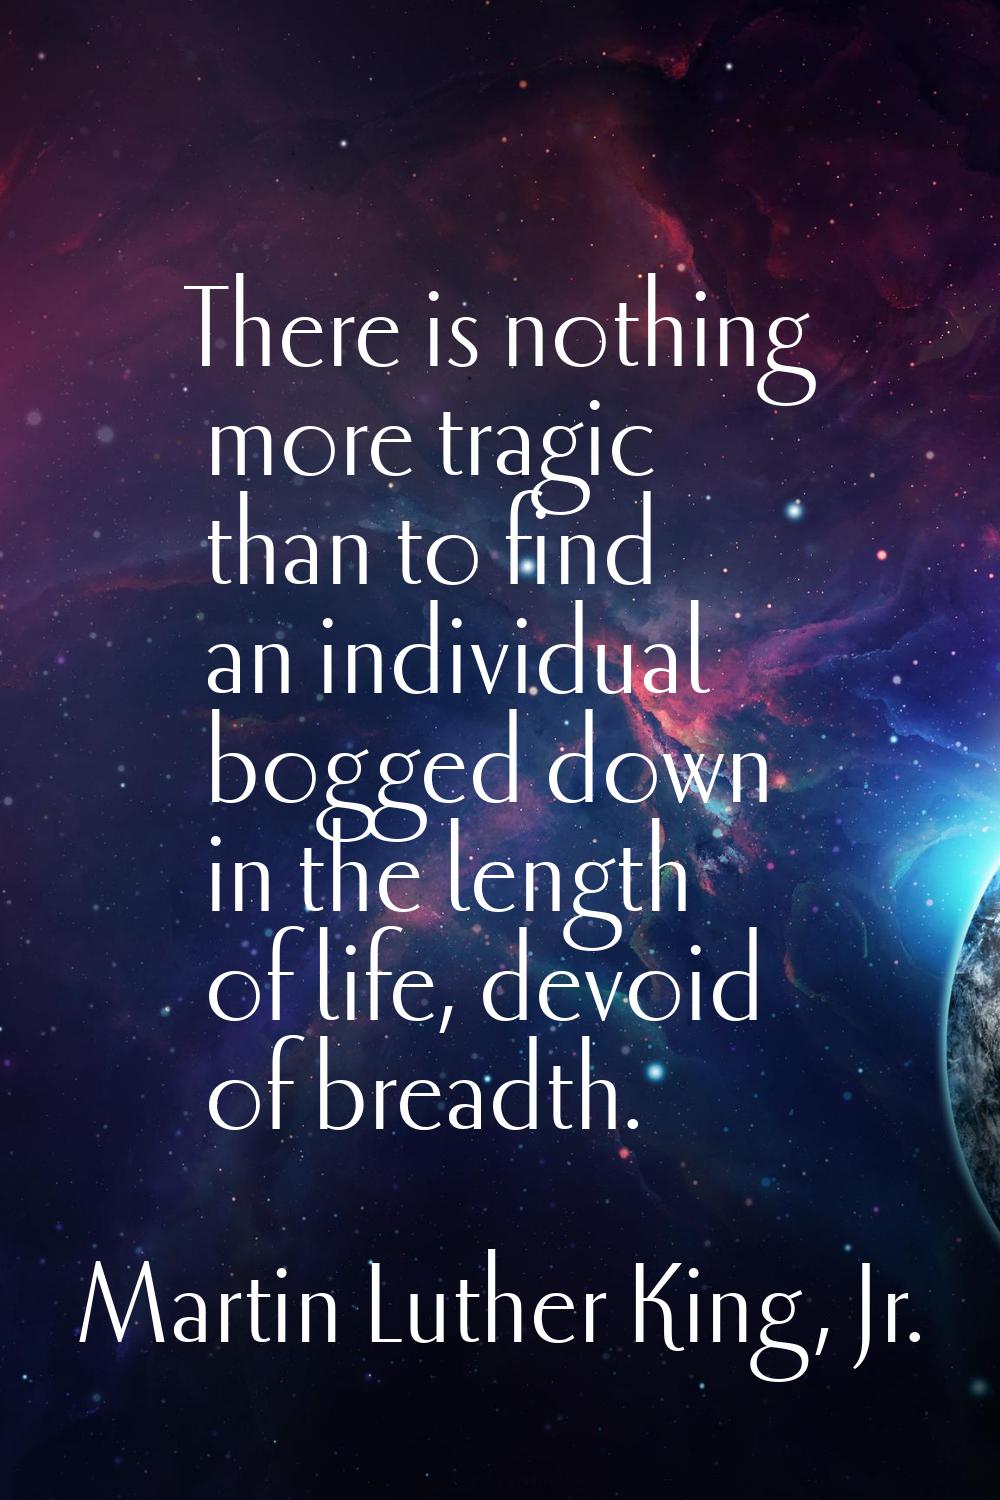 There is nothing more tragic than to find an individual bogged down in the length of life, devoid o